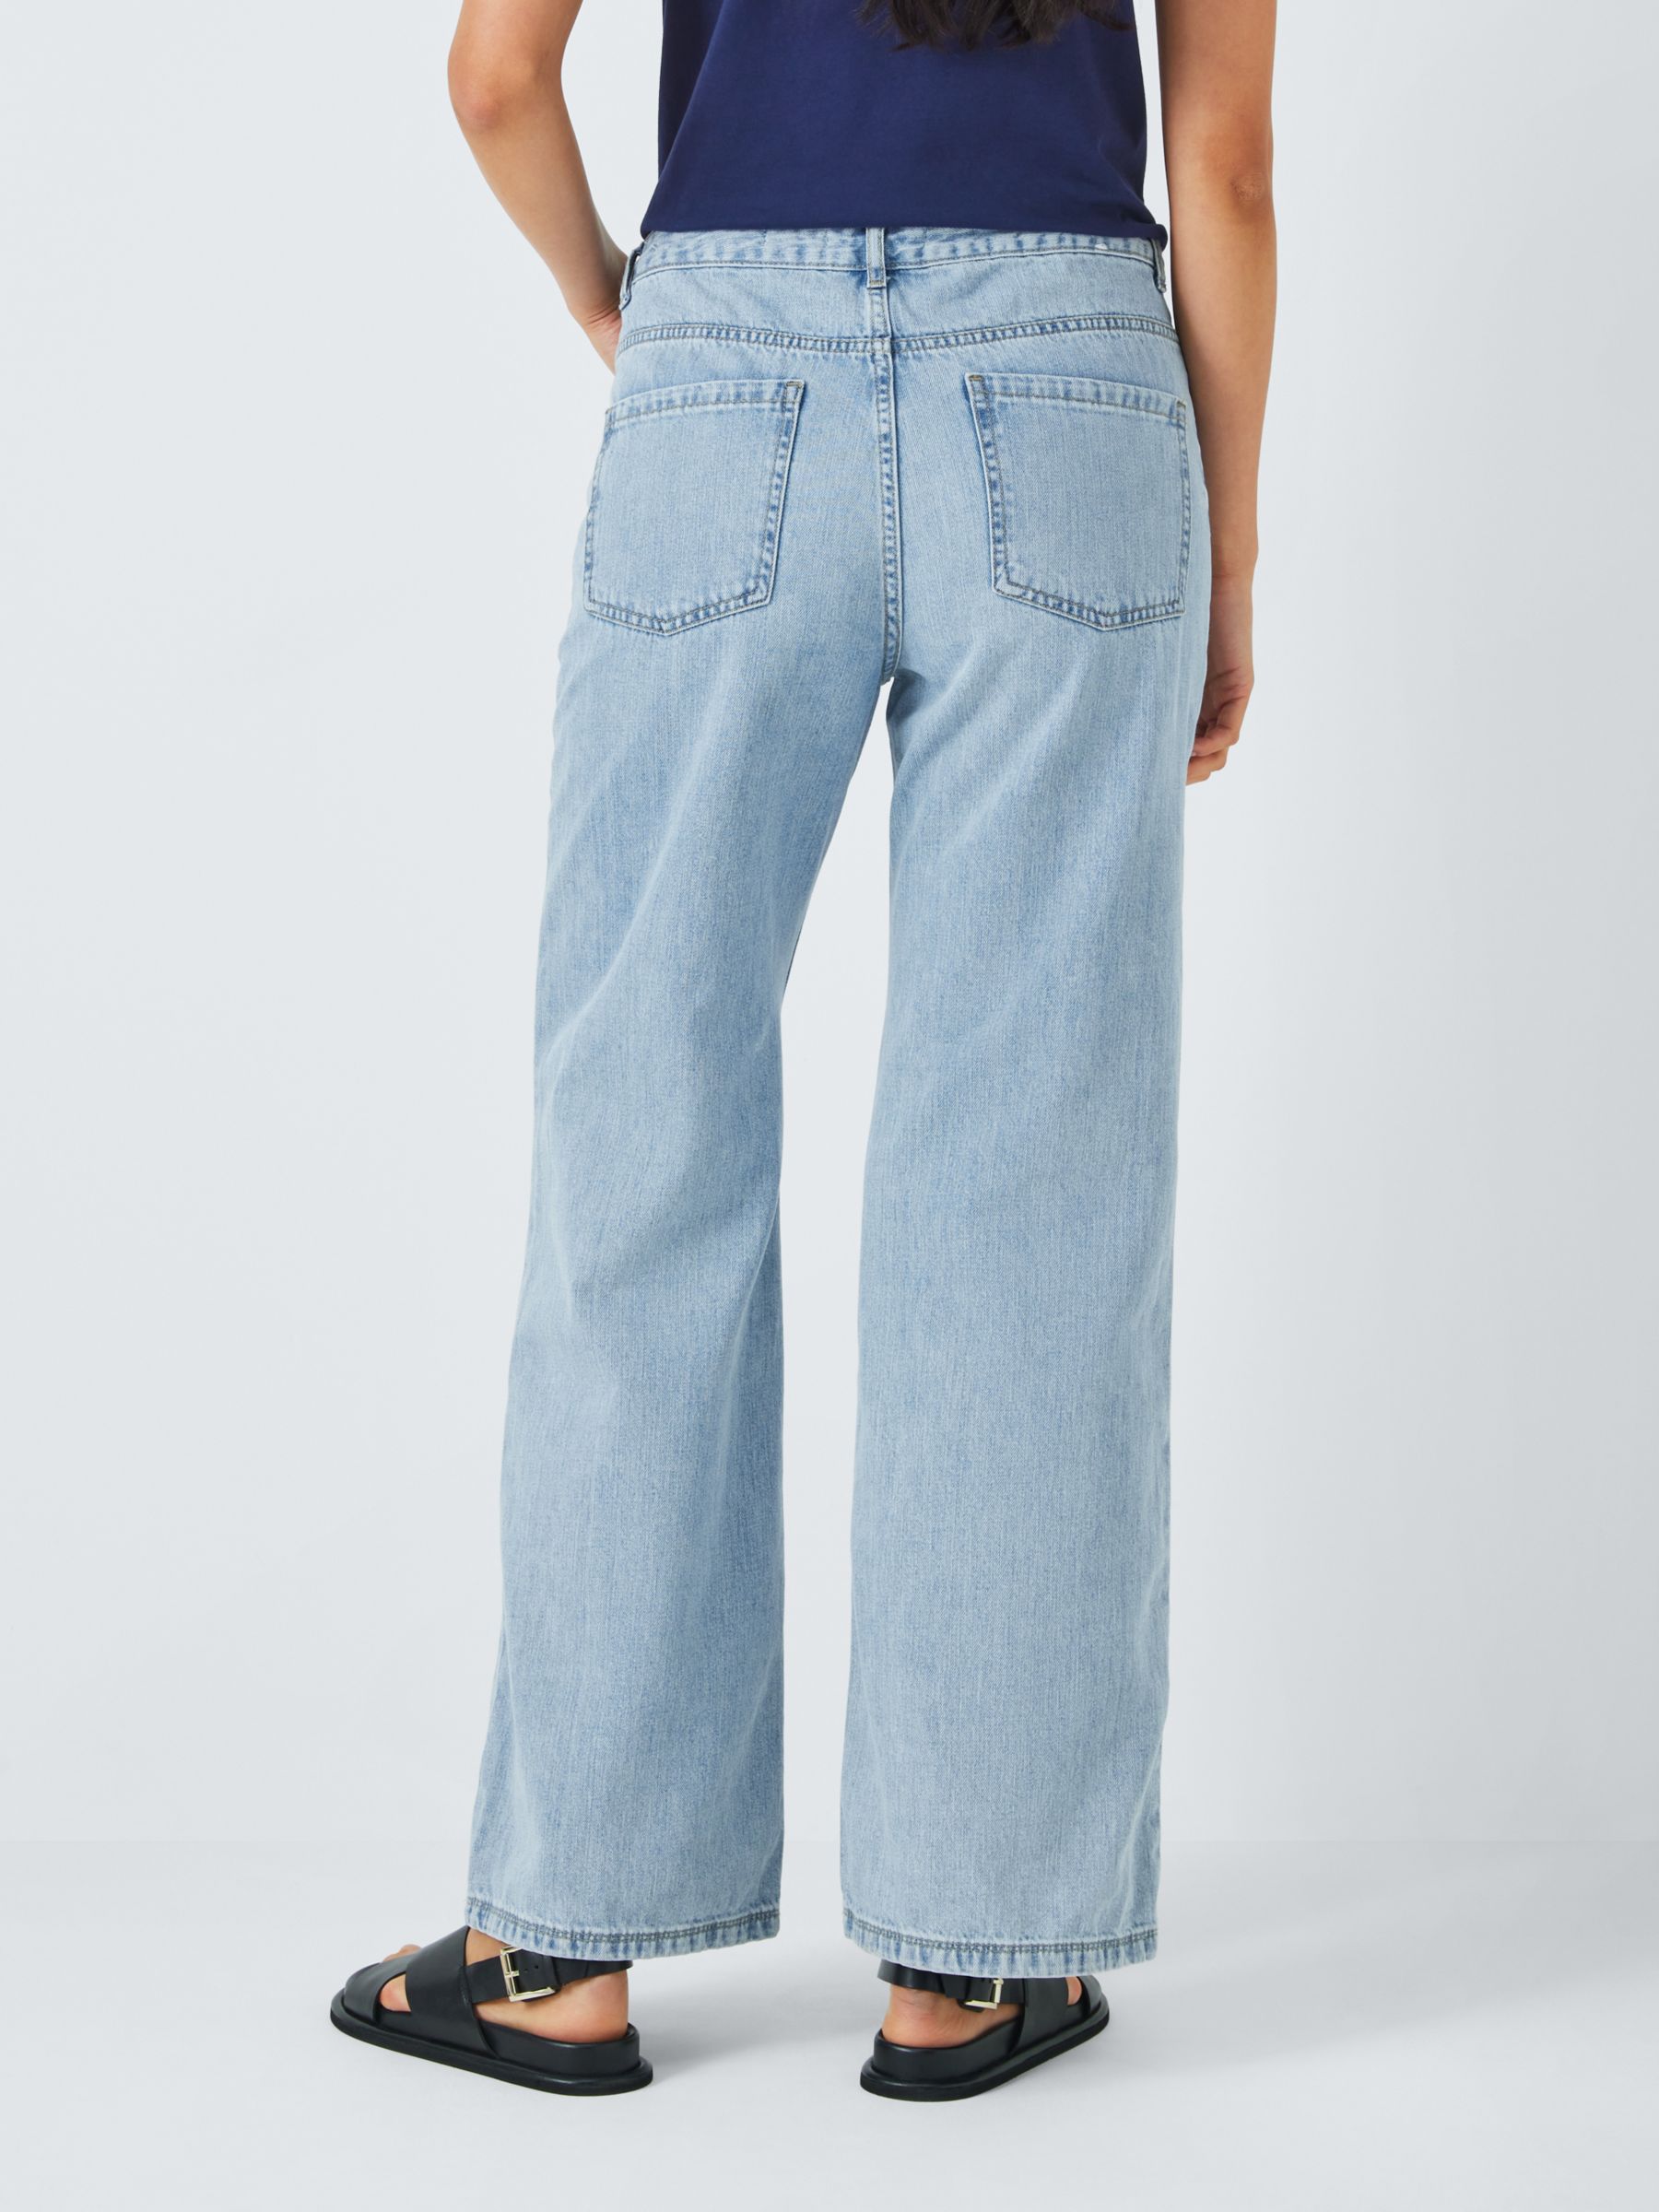 John Lewis ANYDAY Mid Rise Wide Leg Jeans, Light Wash, 6